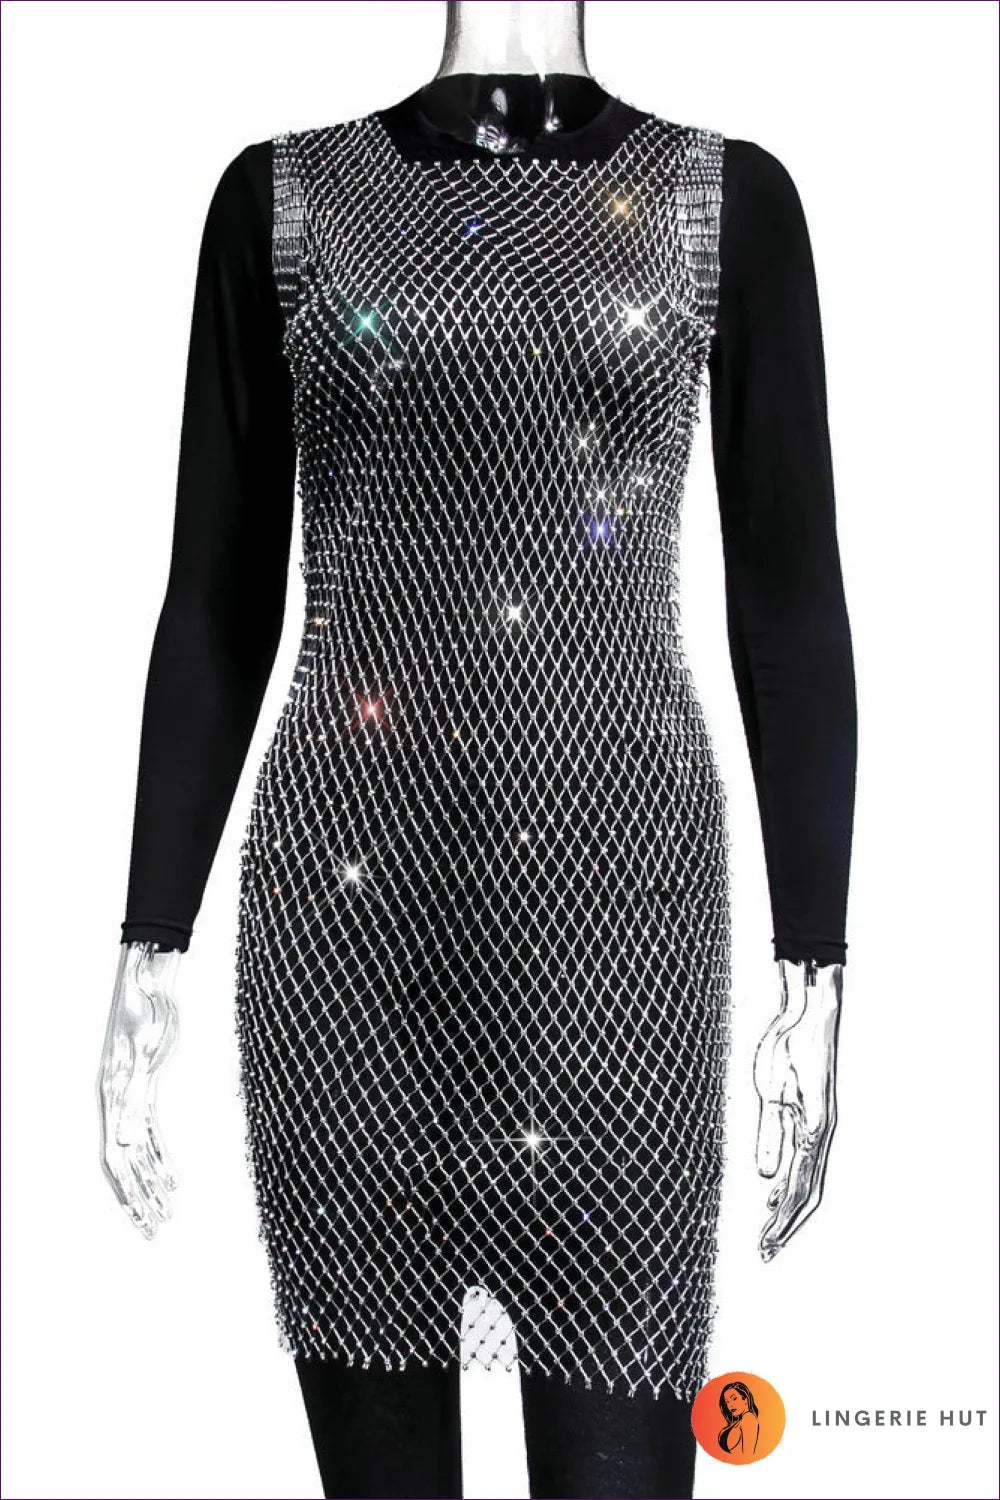 Shine Bright This Summer With Our Rhinestone Fishnet Top. Perfect For Staying Fashionable And Comfortable, Top